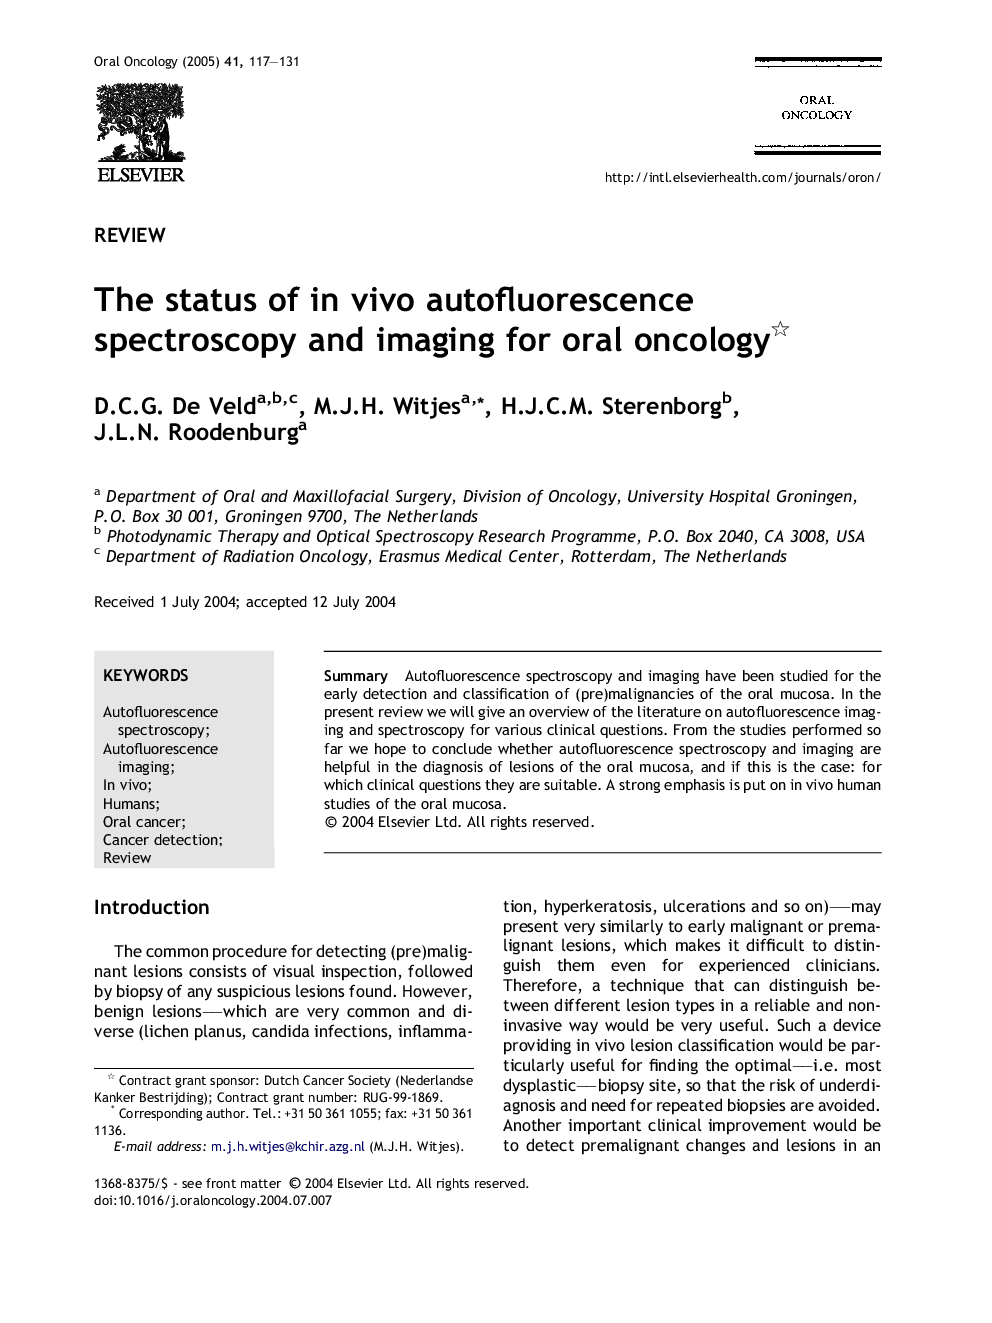 The status of in vivo autofluorescence spectroscopy and imaging for oral oncology